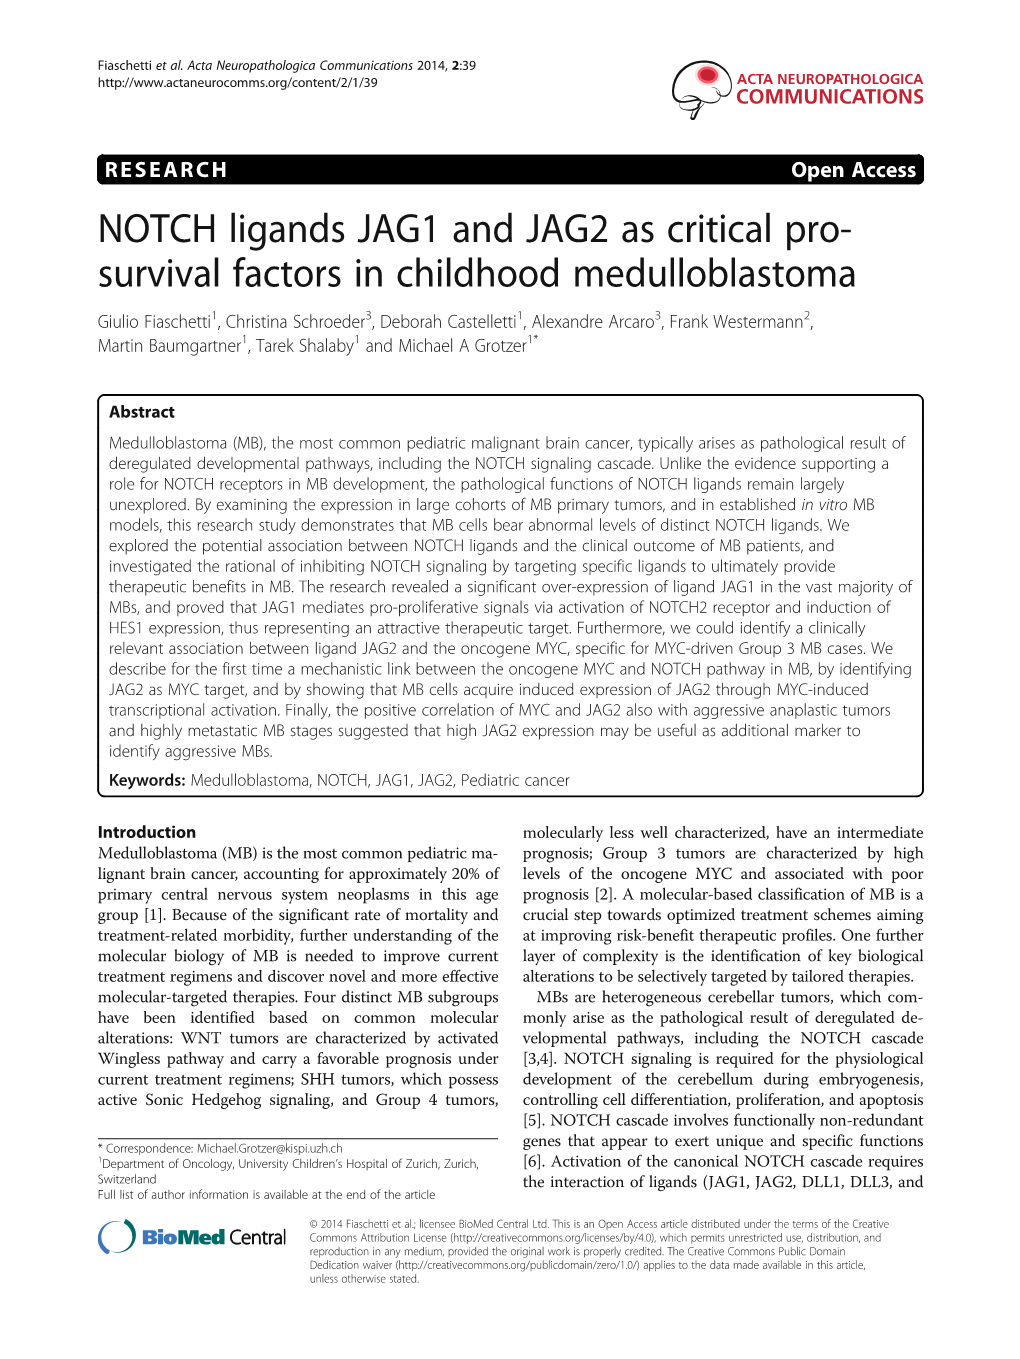 NOTCH Ligands JAG1 and JAG2 As Critical Pro- Survival Factors in Childhood Medulloblastoma